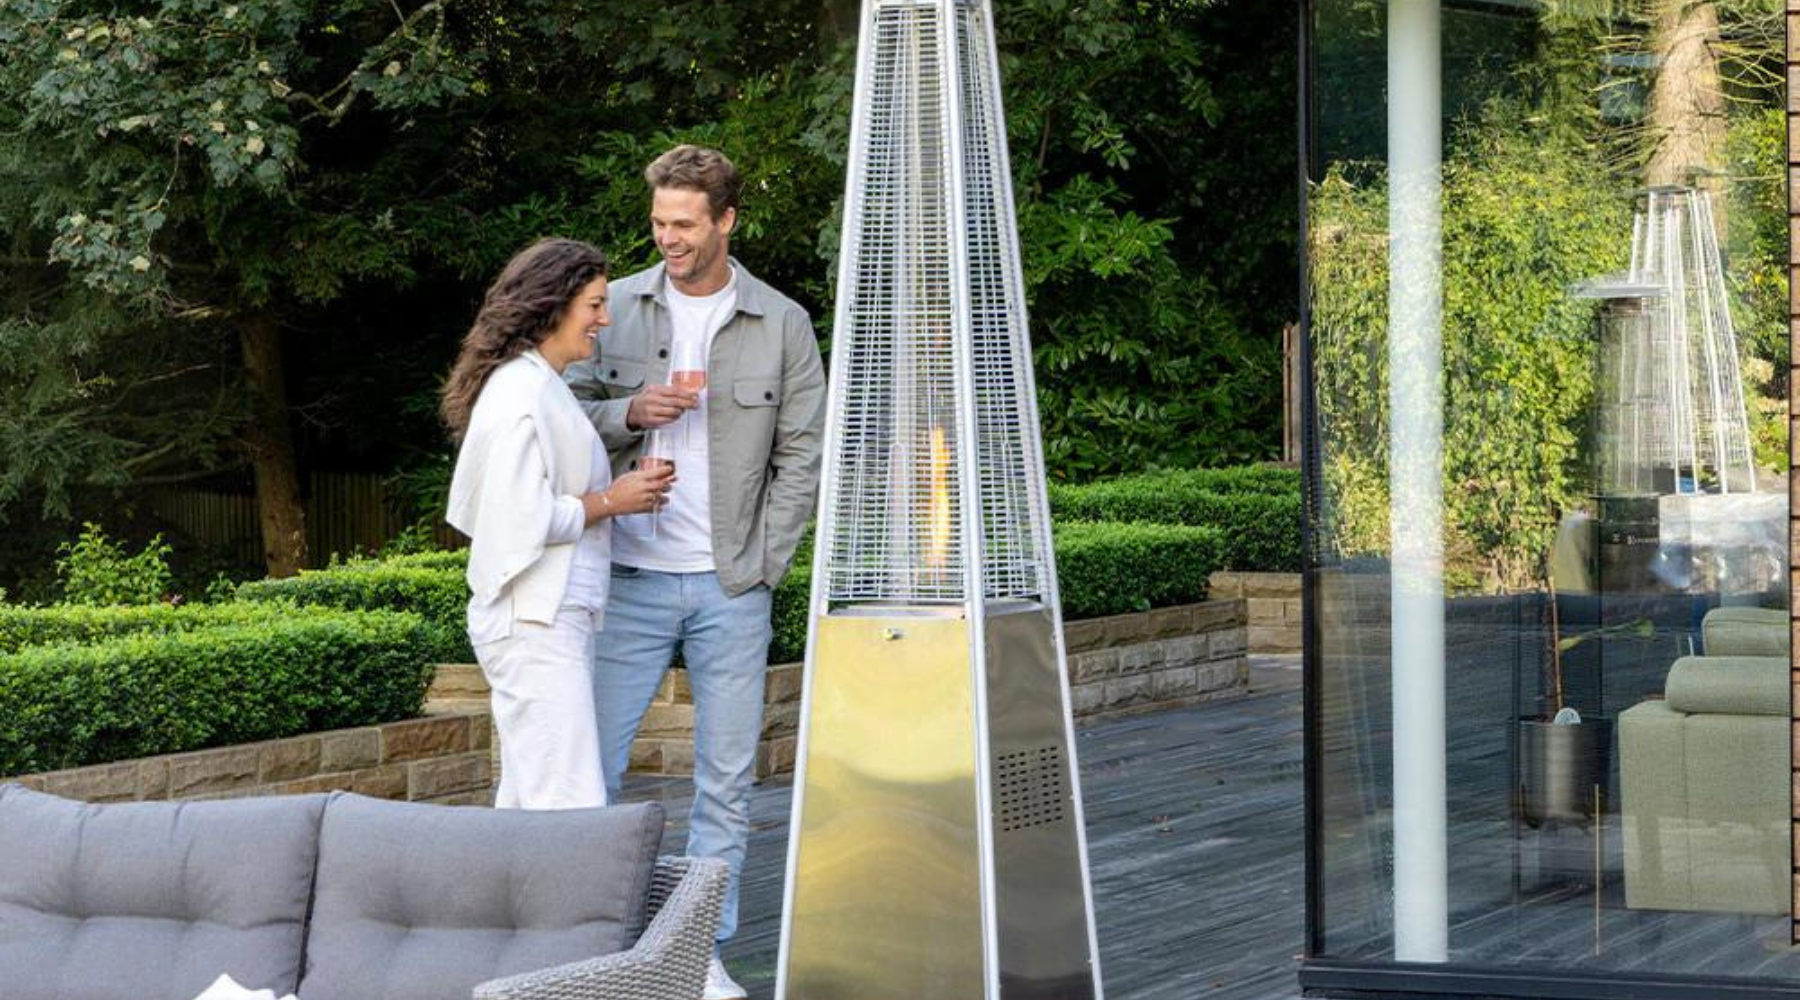 Outdoor Heating Ideas - The Options Available for Keeping Your Outdoor Space Cosy